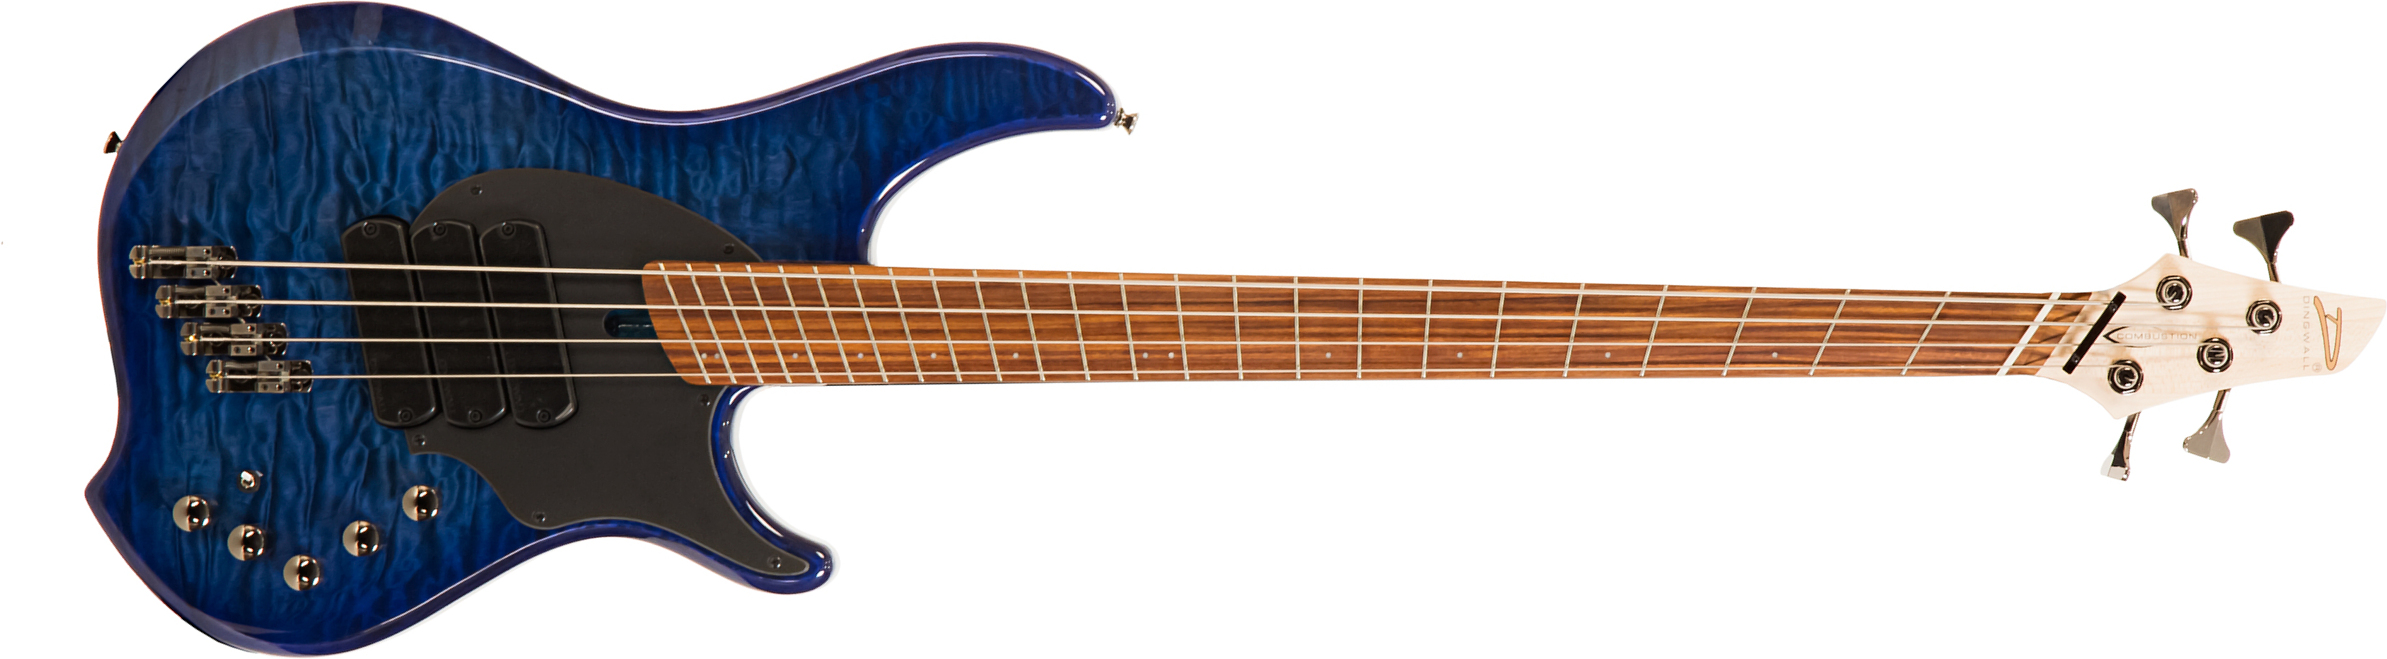 Dingwall Combustion Cb3 4c 3pu Active Pf - Indigo Burst - Solid body electric bass - Main picture